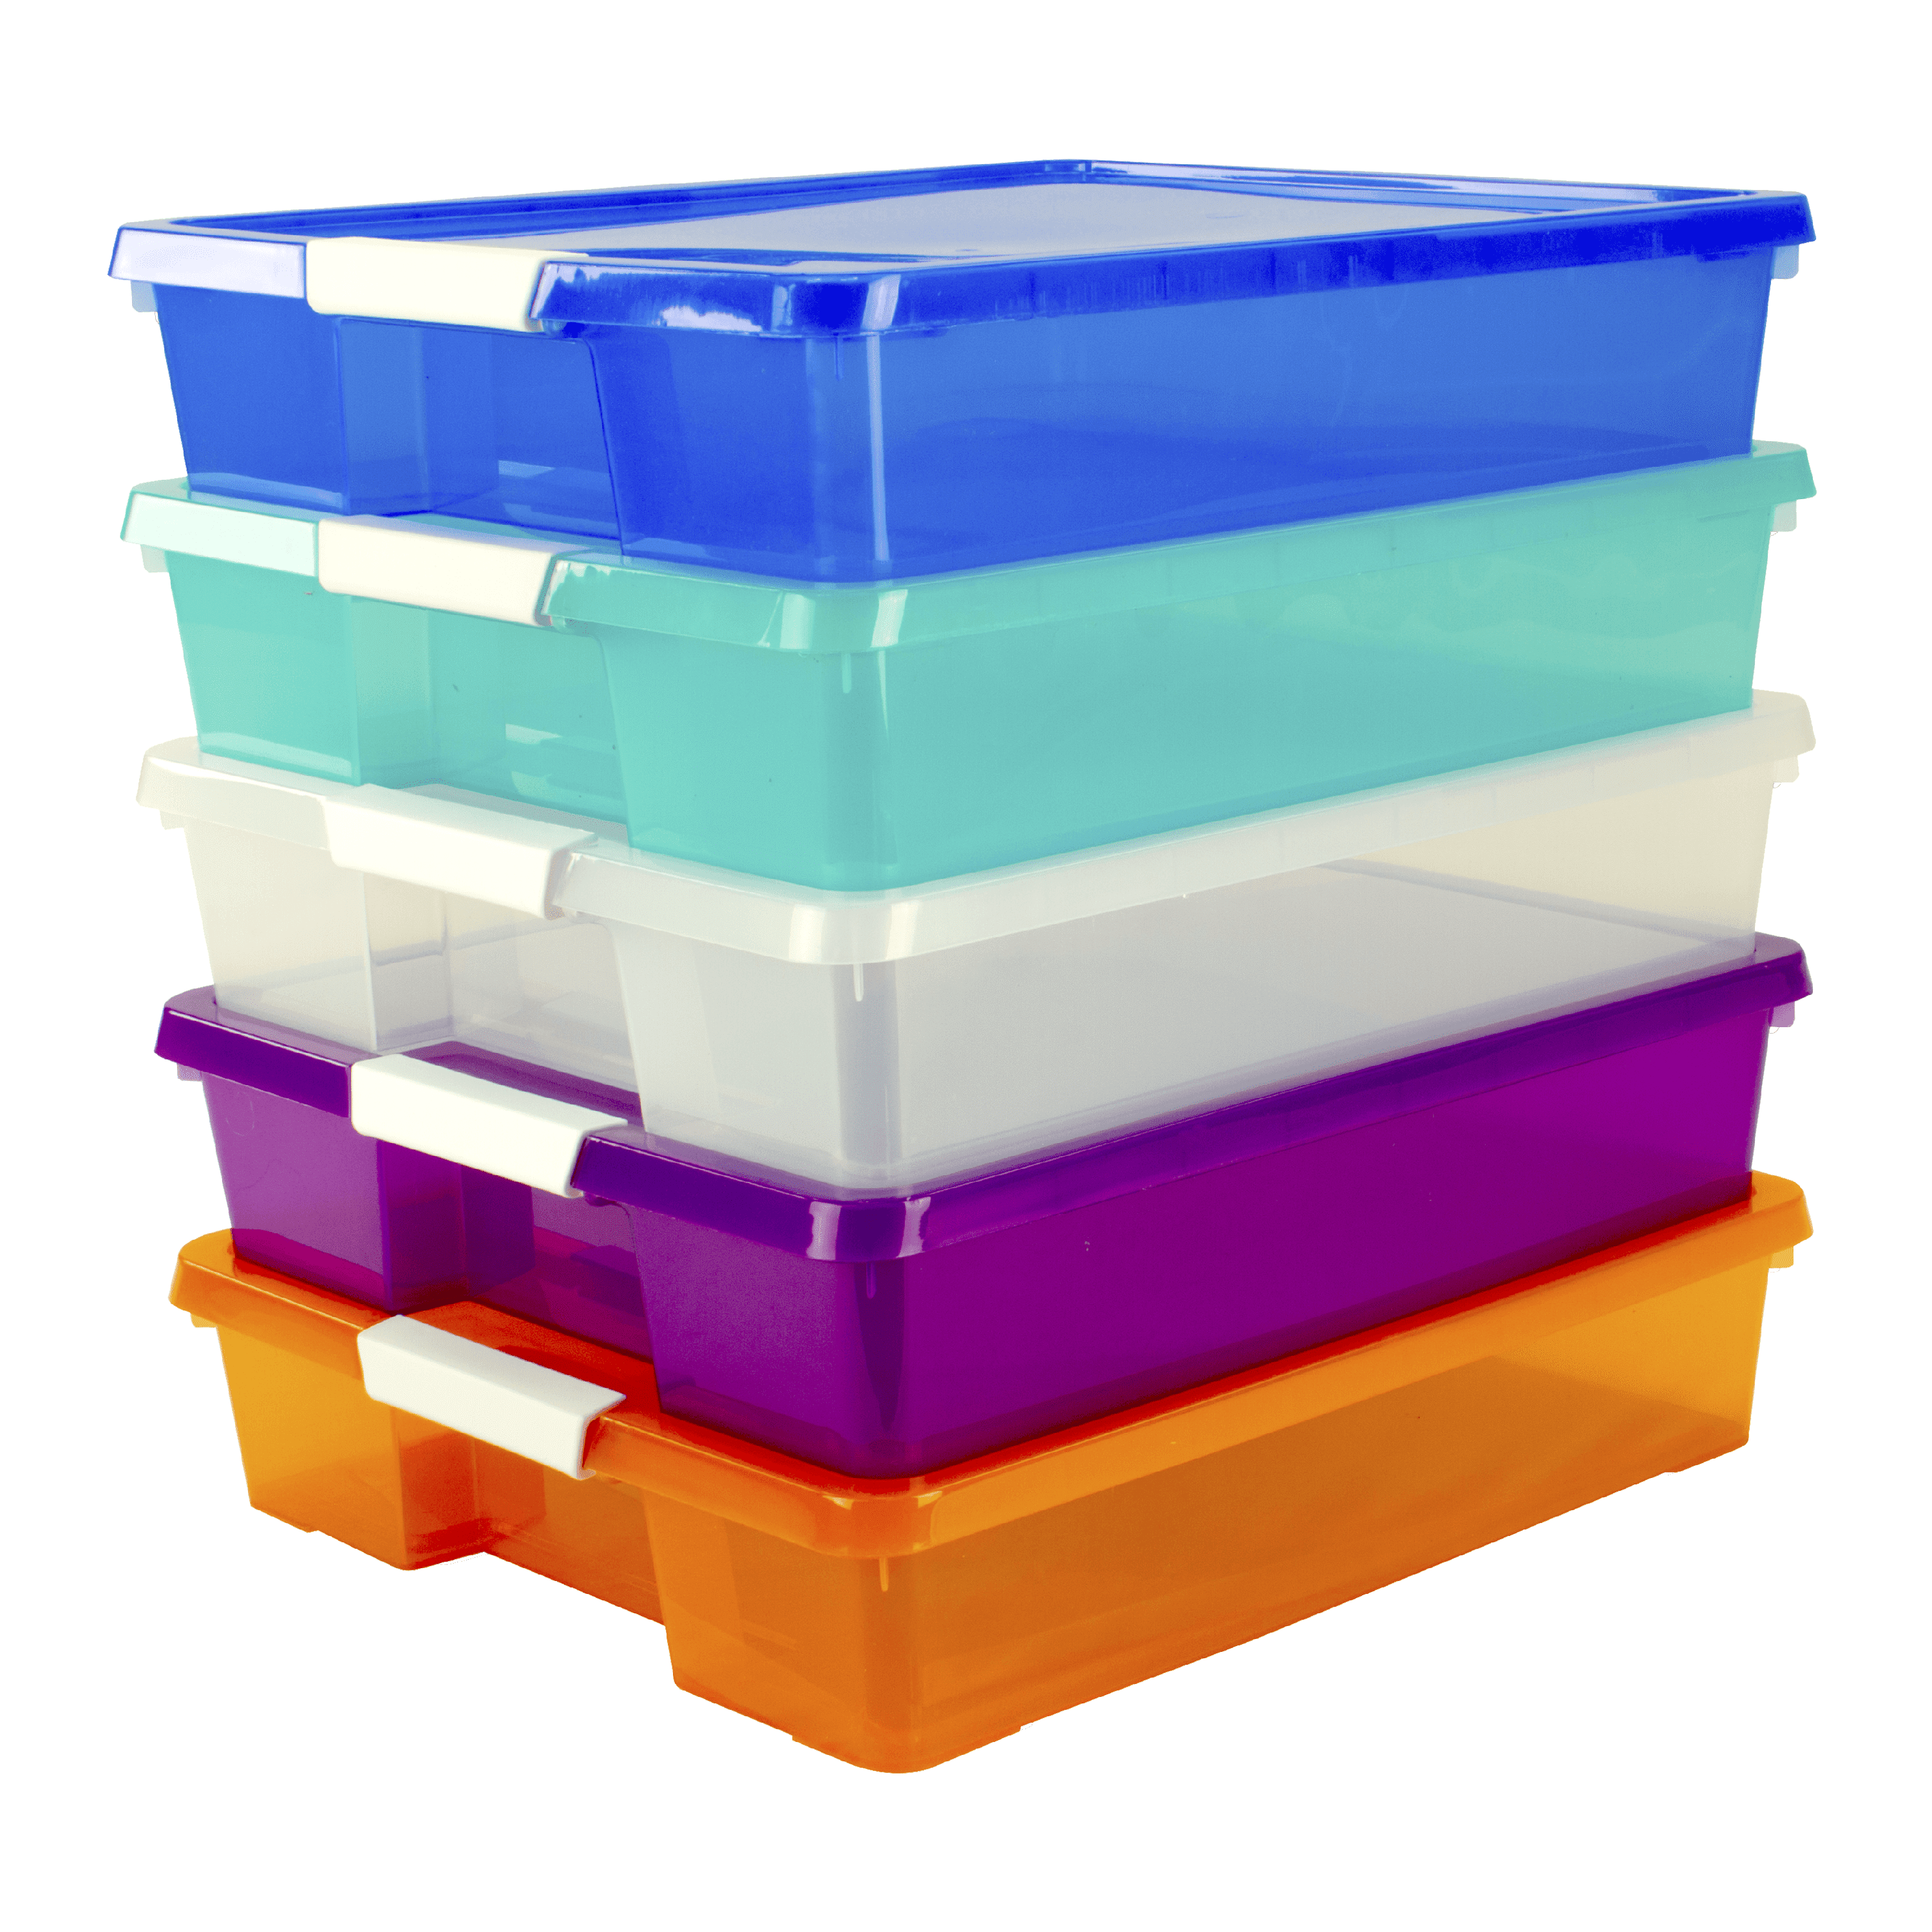 Storex 12x12 Stack & Store Craft Storage Box, Multiple Colors (5 Units